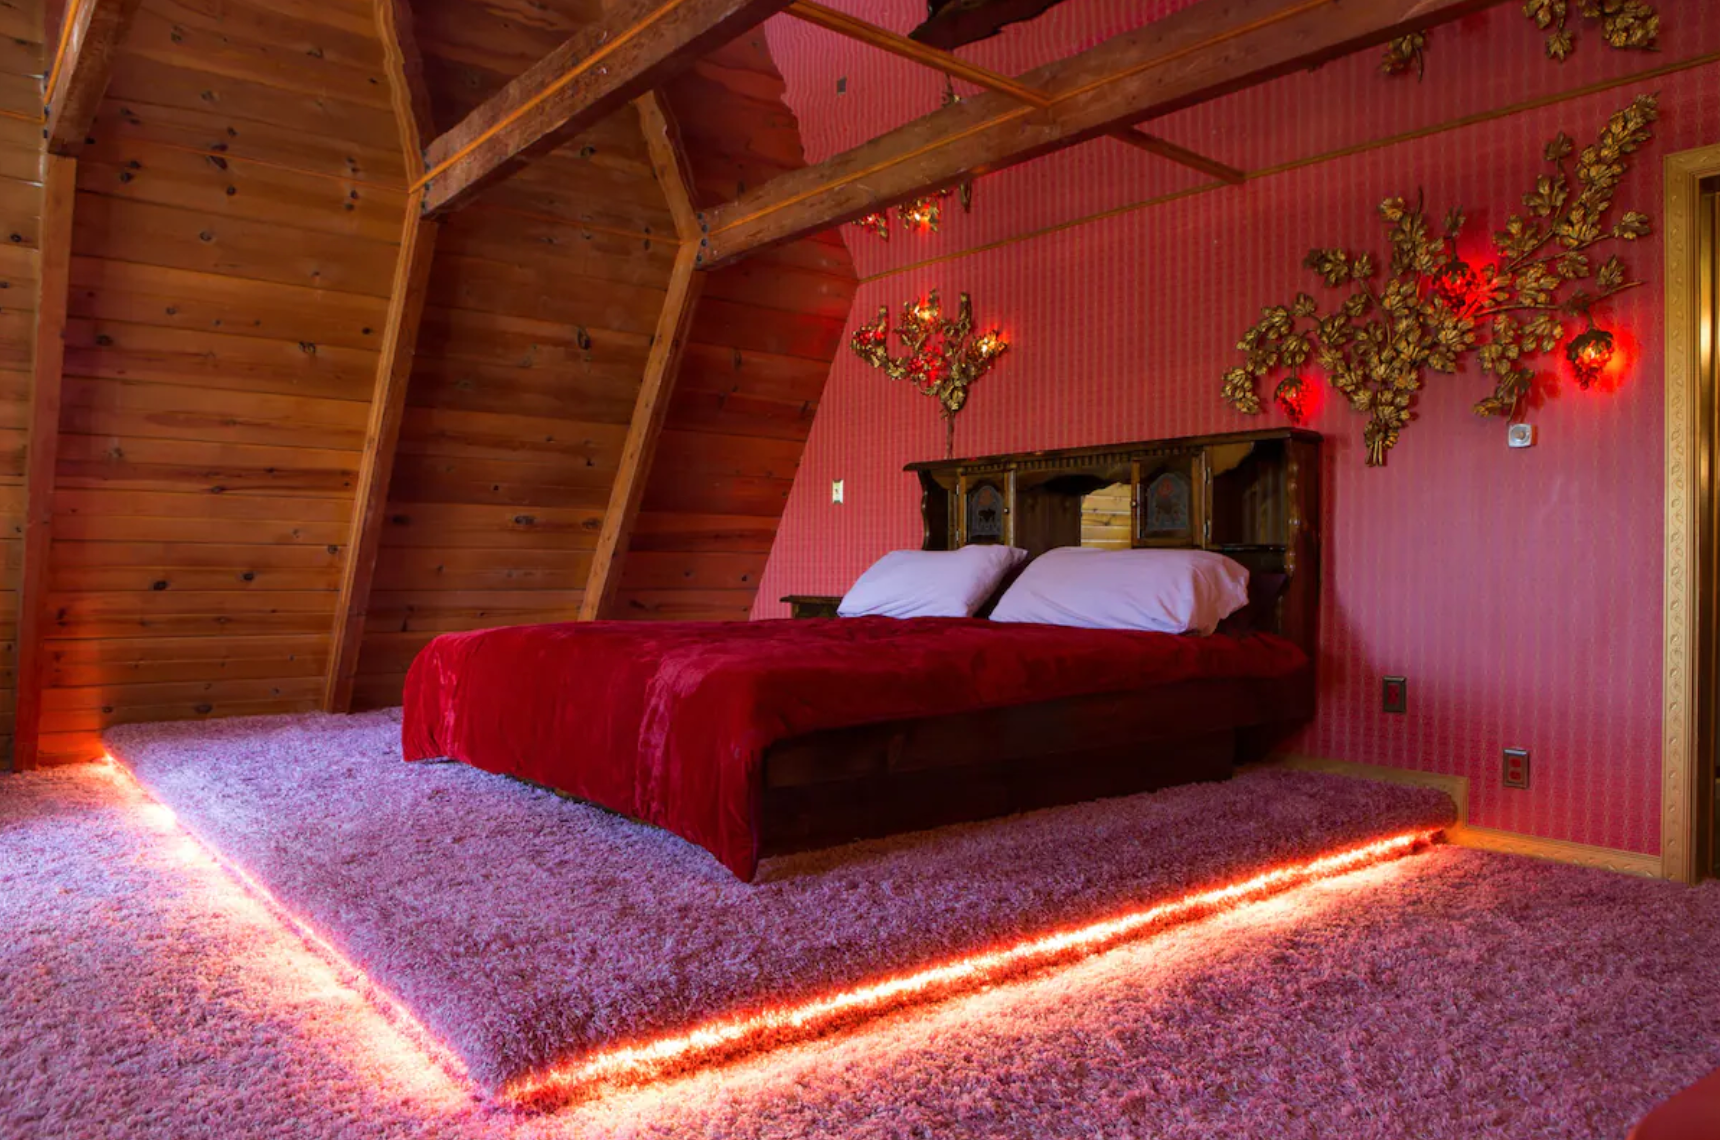 The Sexiest Kitsch Hotels Designed for You to Bone 2022